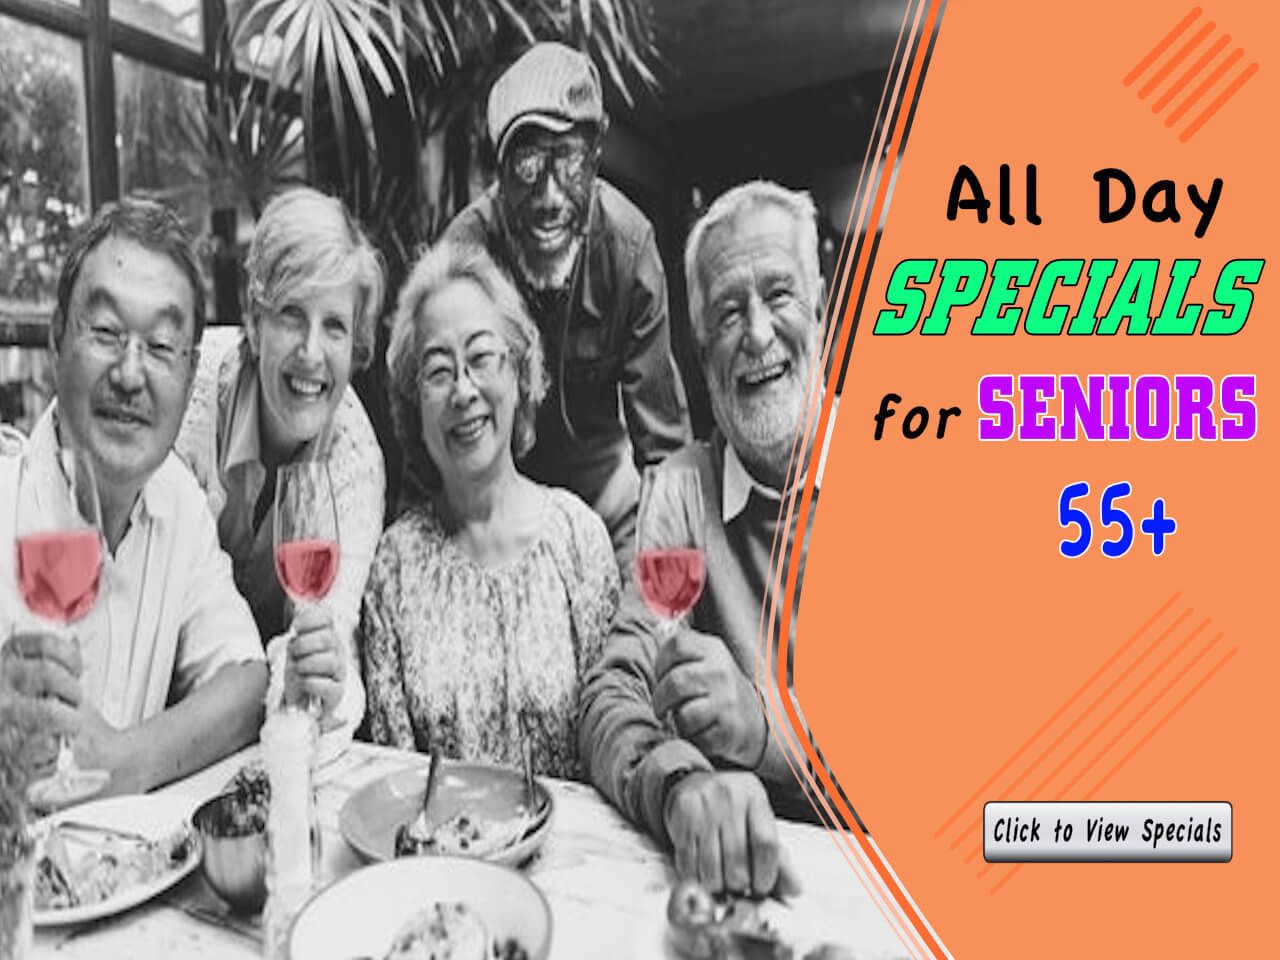 an ad for all day specials for seniors 55+